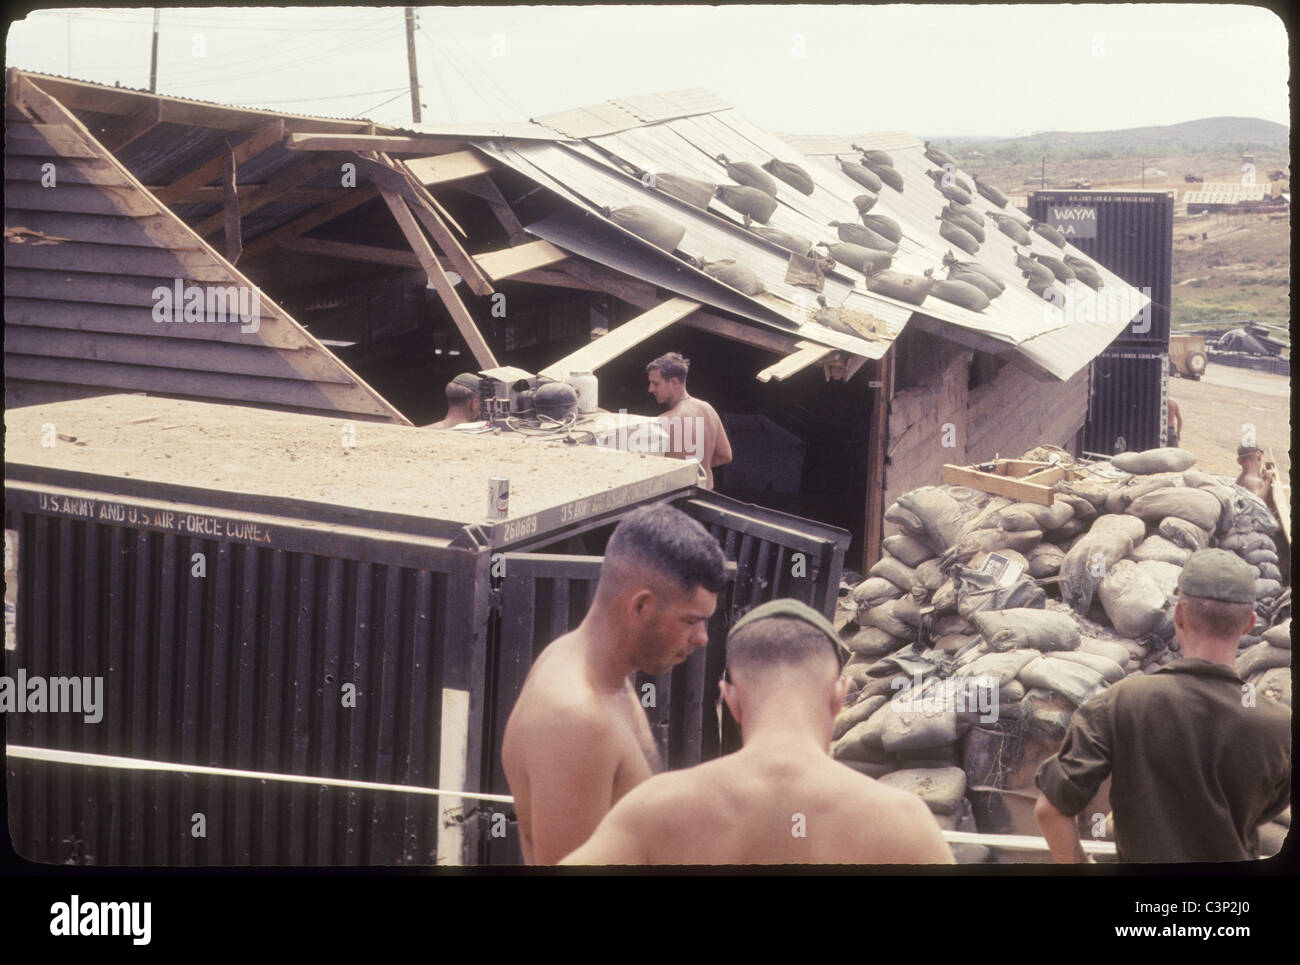 a shau valley 101st Airborne 1969 hooch after rocket hit and wounds 20 GIs americans sandbagged roof Stock Photo